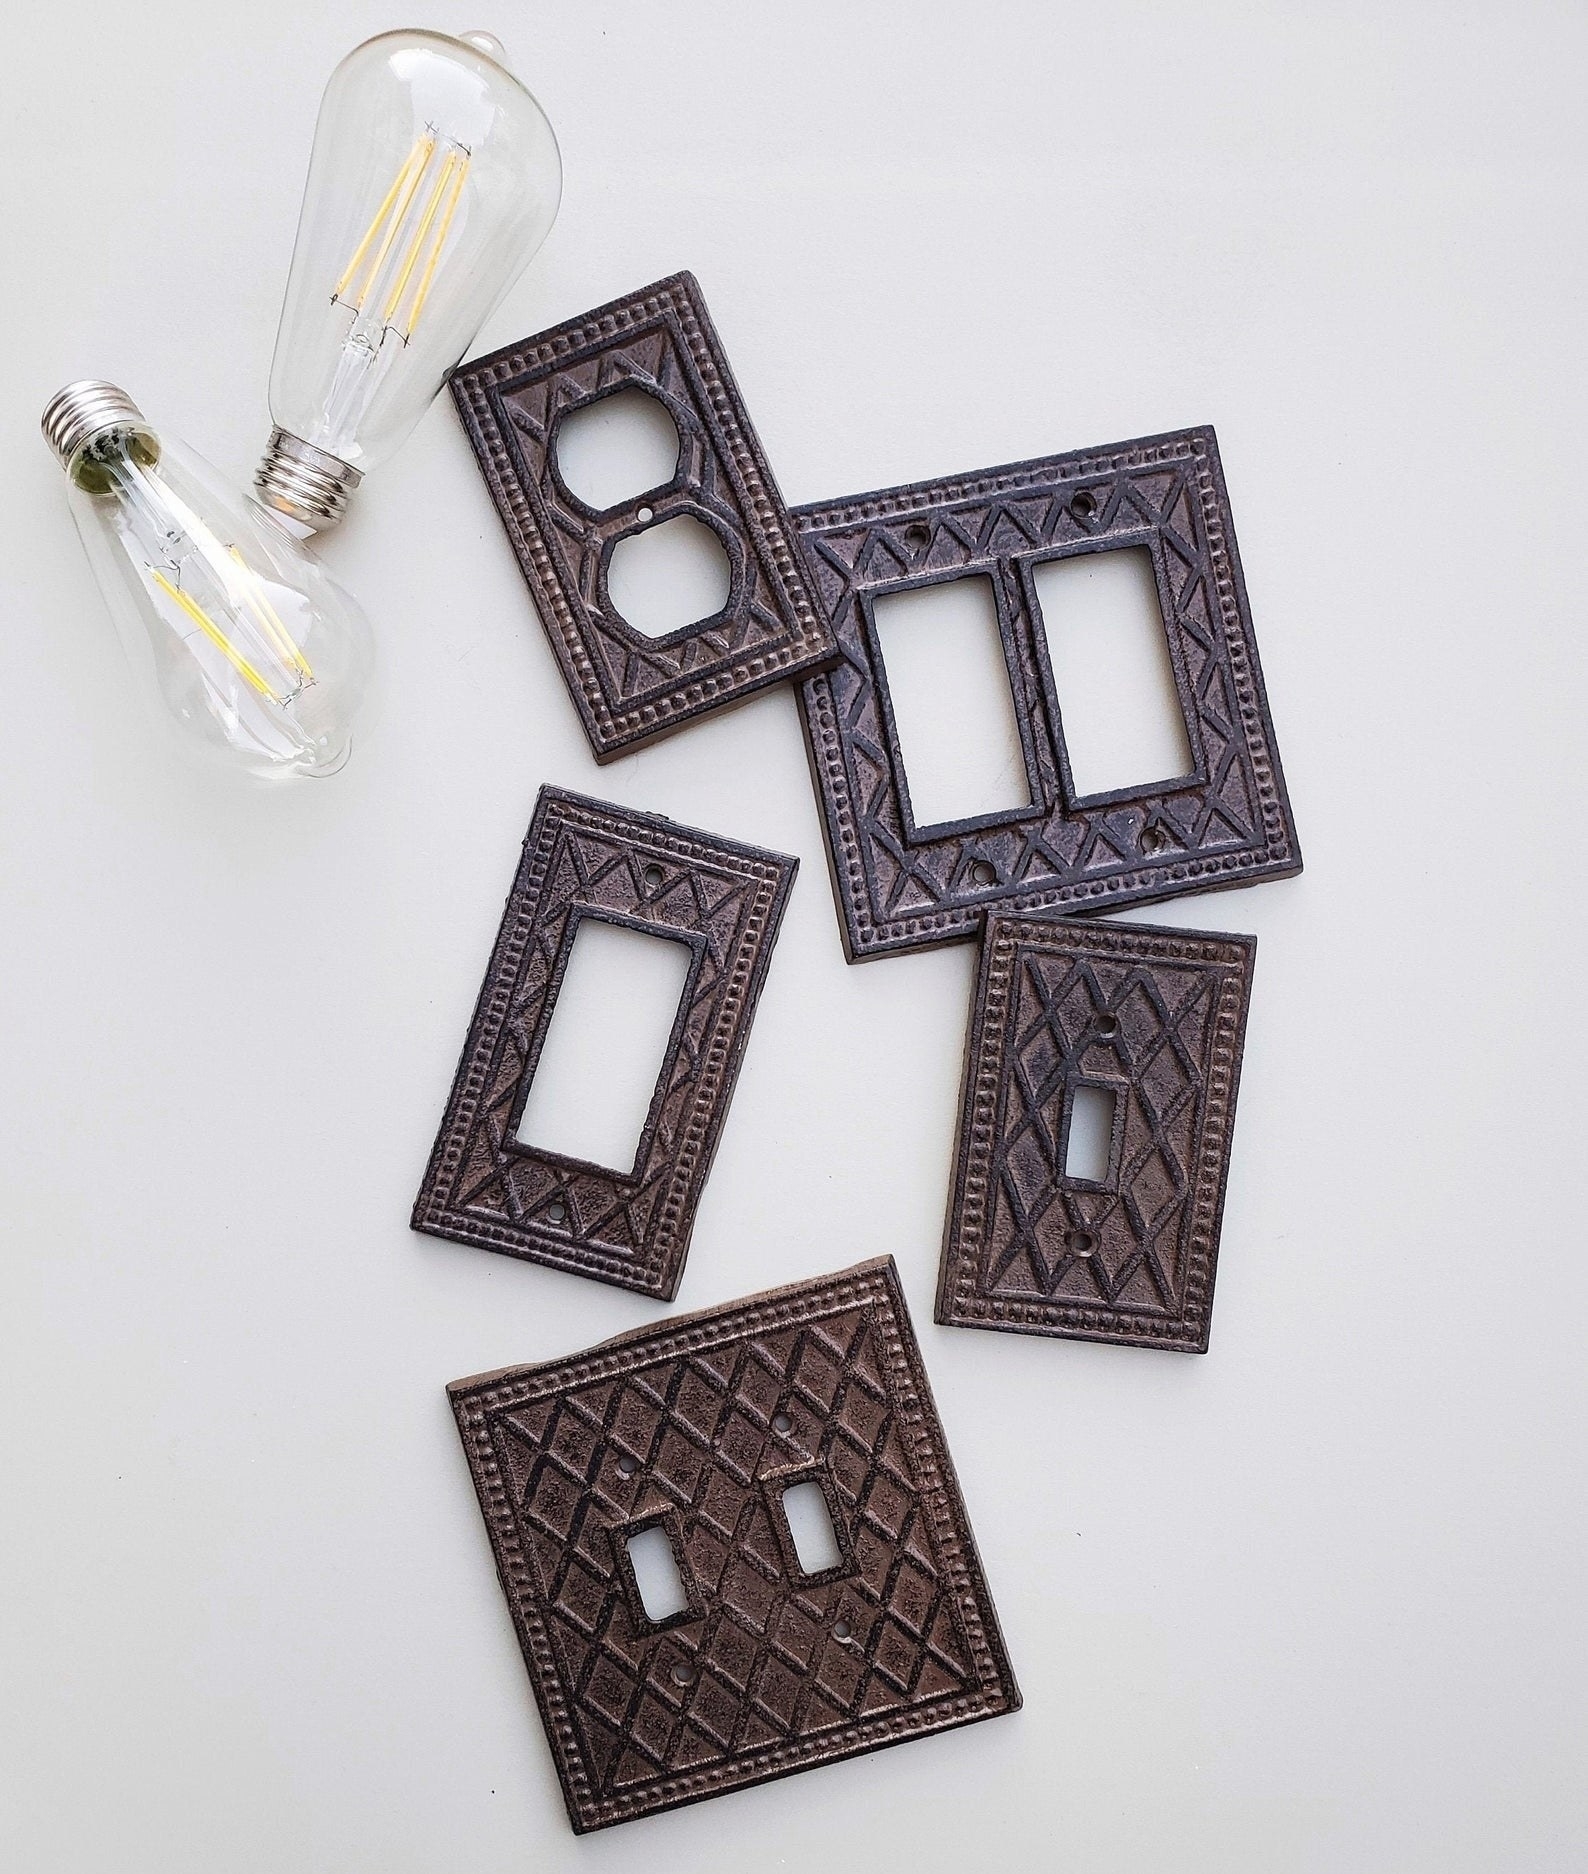 An assortment of decorative light switch covers next to a light bulb on a flat surface